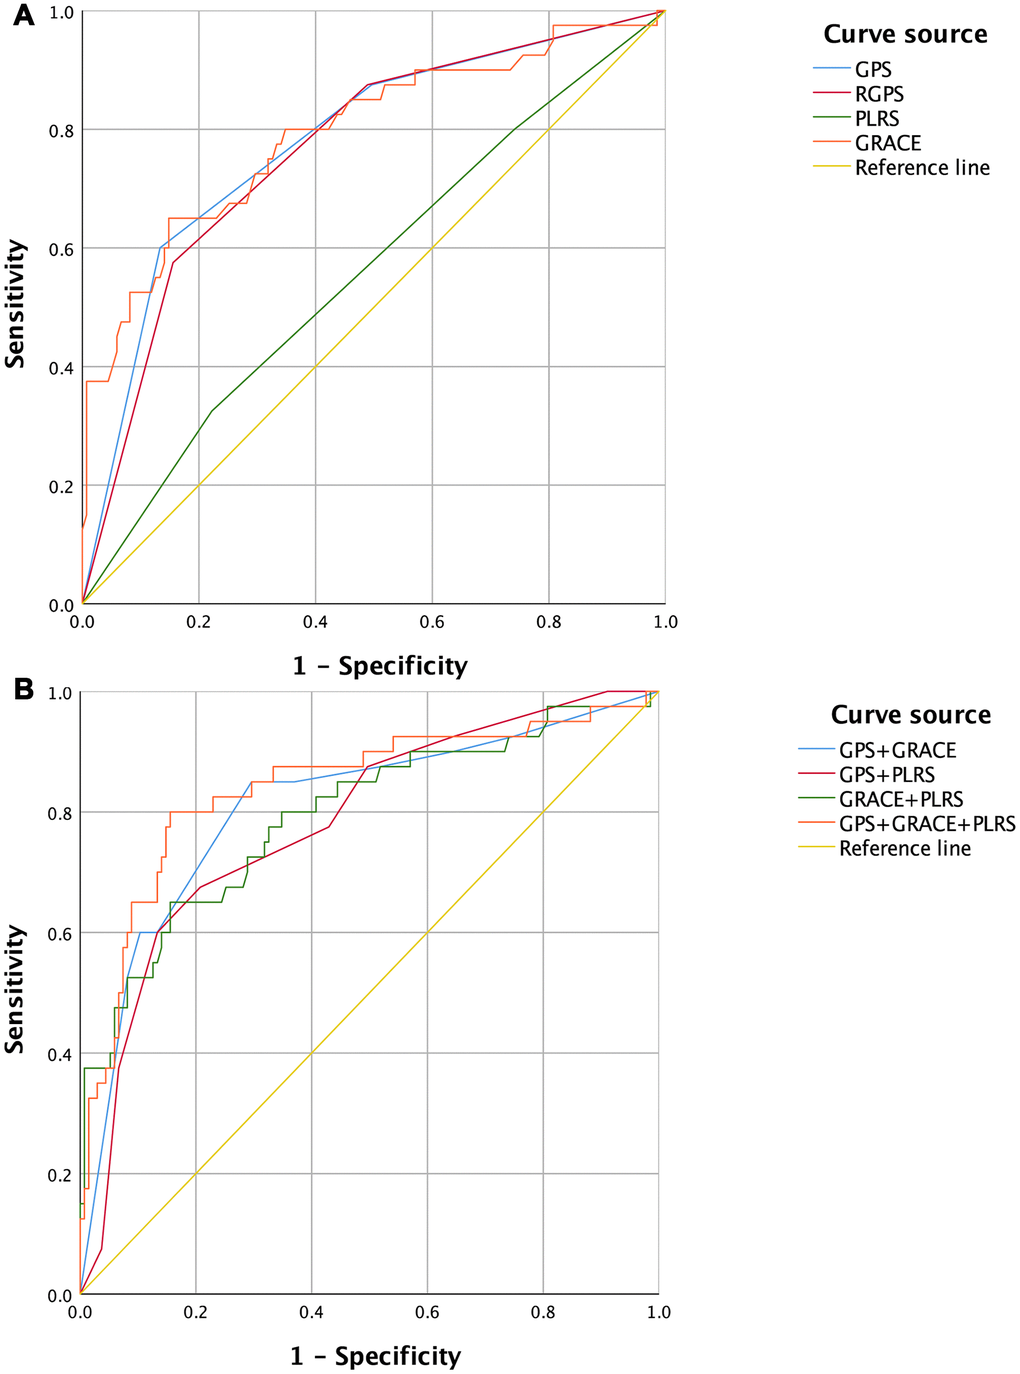 ROC Curves of GPSs, PLRS, GRACE and combined diagnostic models for the occurrence of MACEs in patients with acute myocardial infarction. (A) Univariate ROC curves. (B) Multivariate ROC curves. GPS, inflammation-based Glasgow Prognostic Score; GRACE, Global Registry of Acute Coronary Events; MACEs, major adverse cardiovascular and cerebrovascular events; PLRS, platelet-to-lymphocyte score; RGPS, Redefined inflammation-based Glasgow Prognostic Score; ROC, receiver operating characteristic.